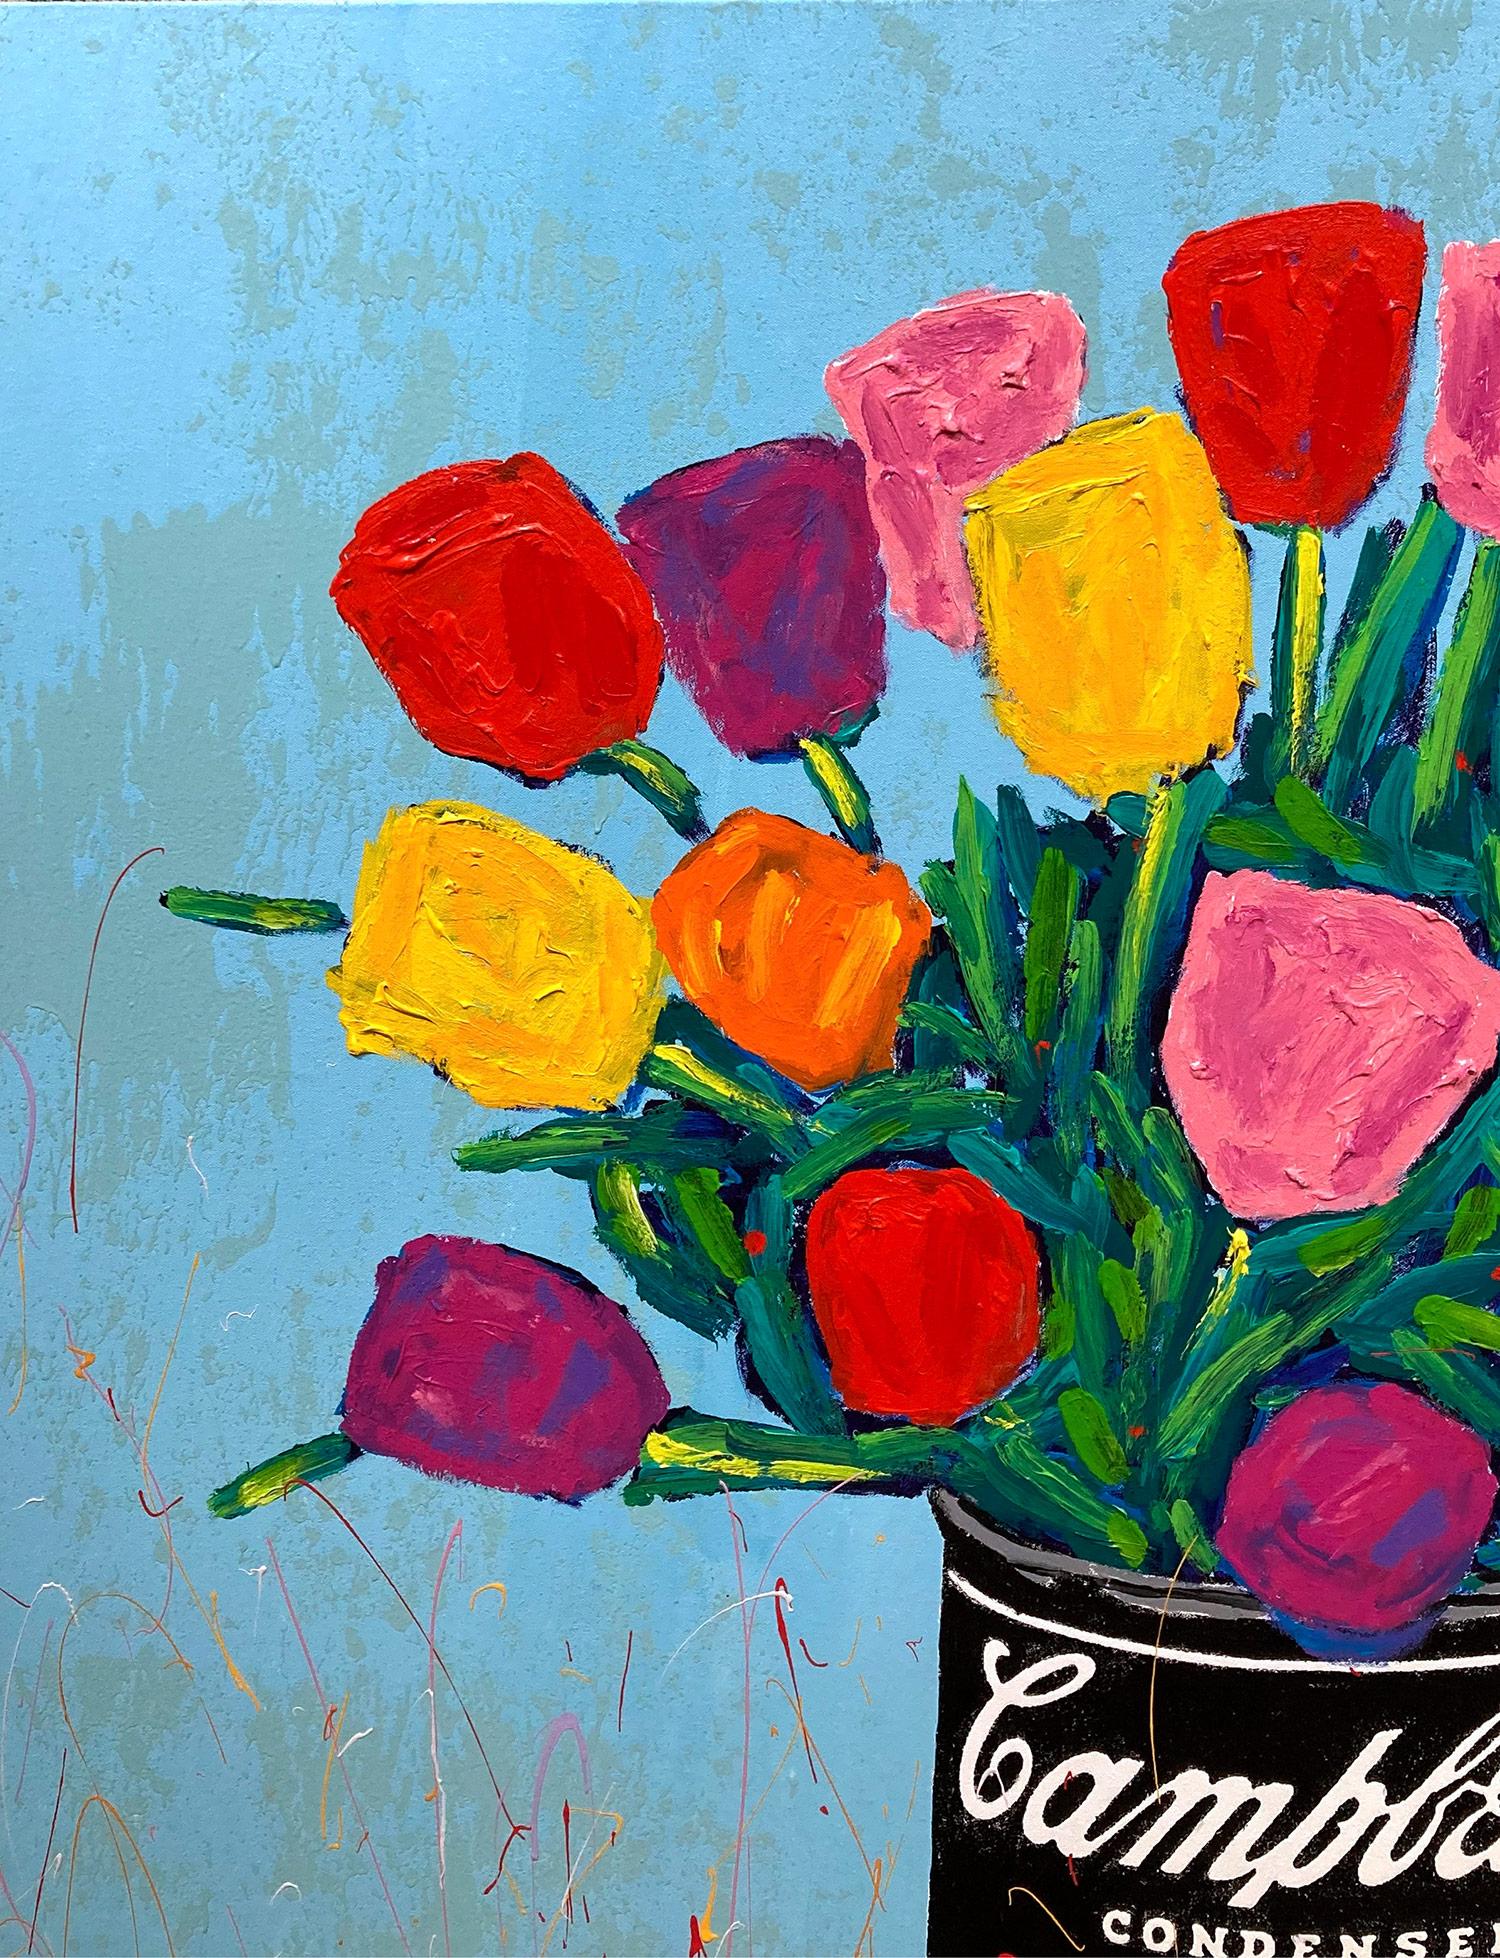 A large pop piece depicting Andy Warhols iconic Campbell's tomato soup holding a colorful bouquet of tulips. Bursting with impasto painting, and quick brushwork we are drawn to the movement, as the artist is able to engage his viewer with